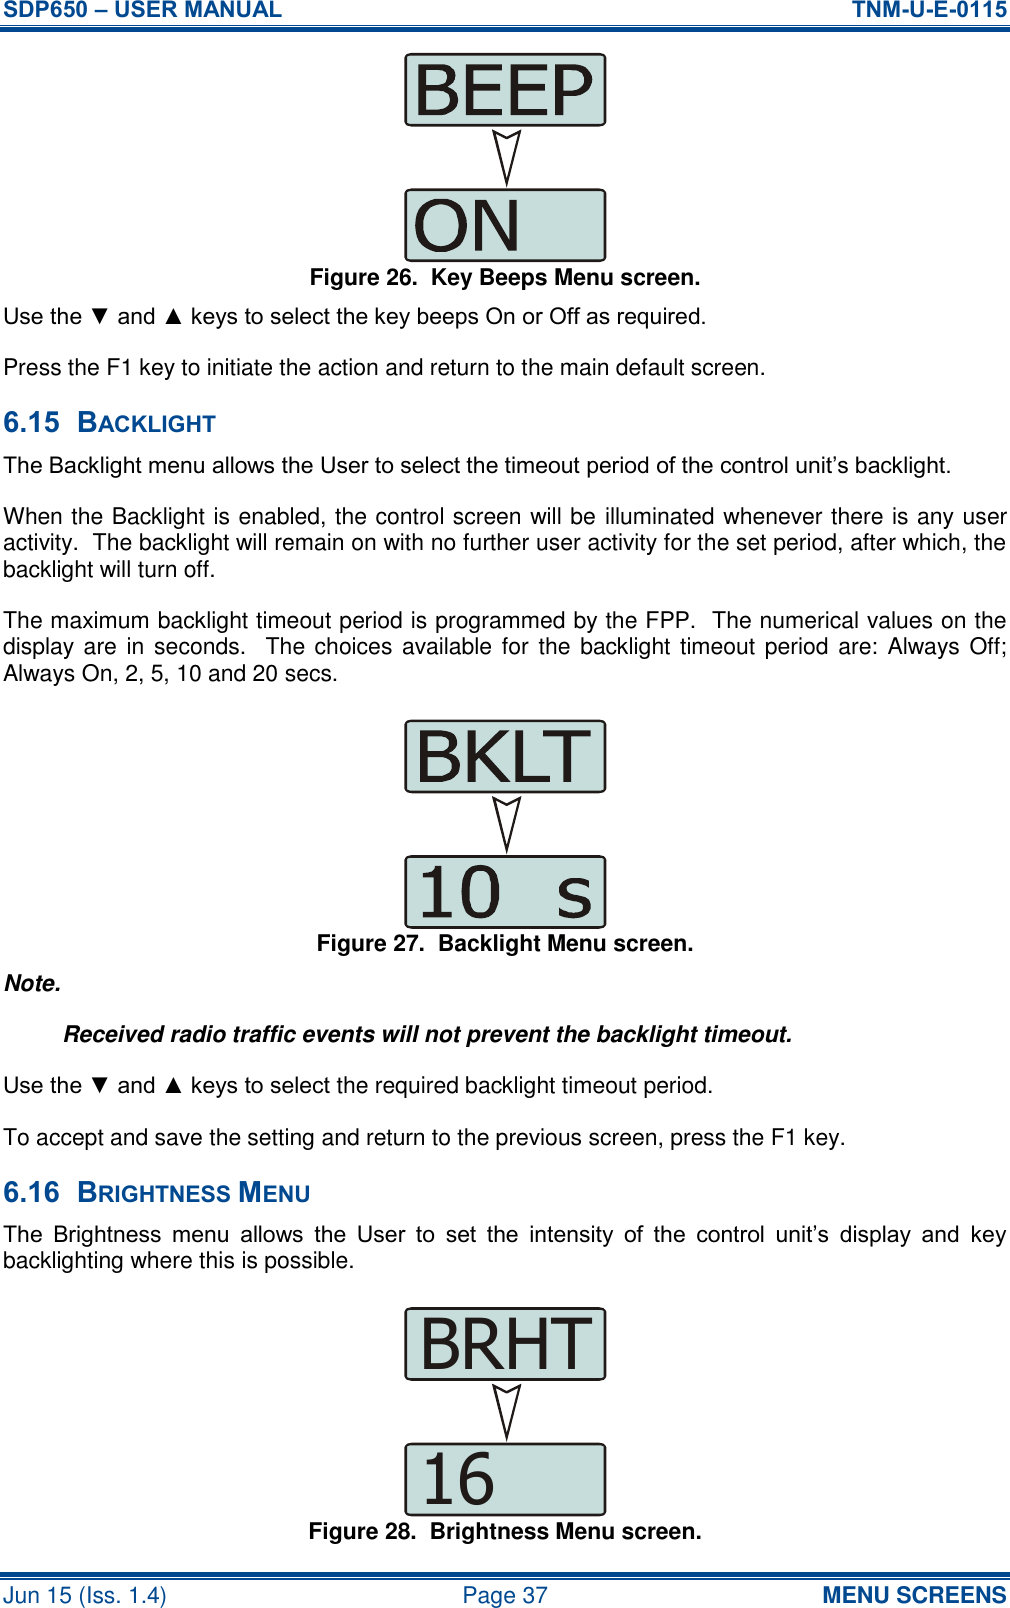 SDP650 – USER MANUAL  TNM-U-E-0115 Jun 15 (Iss. 1.4)  Page 37 MENU SCREENS Figure 26.  Key Beeps Menu screen. Use the ▼ and ▲ keys to select the key beeps On or Off as required. Press the F1 key to initiate the action and return to the main default screen. 6.15 BACKLIGHT The Backlight menu allows the User to select the timeout period of the control unit’s backlight. When the Backlight is enabled, the control screen will be illuminated whenever there is any user activity.  The backlight will remain on with no further user activity for the set period, after which, the backlight will turn off. The maximum backlight timeout period is programmed by the FPP.  The numerical values on the display are in seconds.  The choices available for  the backlight timeout period  are: Always Off; Always On, 2, 5, 10 and 20 secs. Figure 27.  Backlight Menu screen. Note. Received radio traffic events will not prevent the backlight timeout. Use the ▼ and ▲ keys to select the required backlight timeout period. To accept and save the setting and return to the previous screen, press the F1 key. 6.16 BRIGHTNESS MENU The  Brightness  menu  allows  the  User  to  set  the  intensity  of  the  control  unit’s  display  and  key backlighting where this is possible. Figure 28.  Brightness Menu screen. 16BRHT